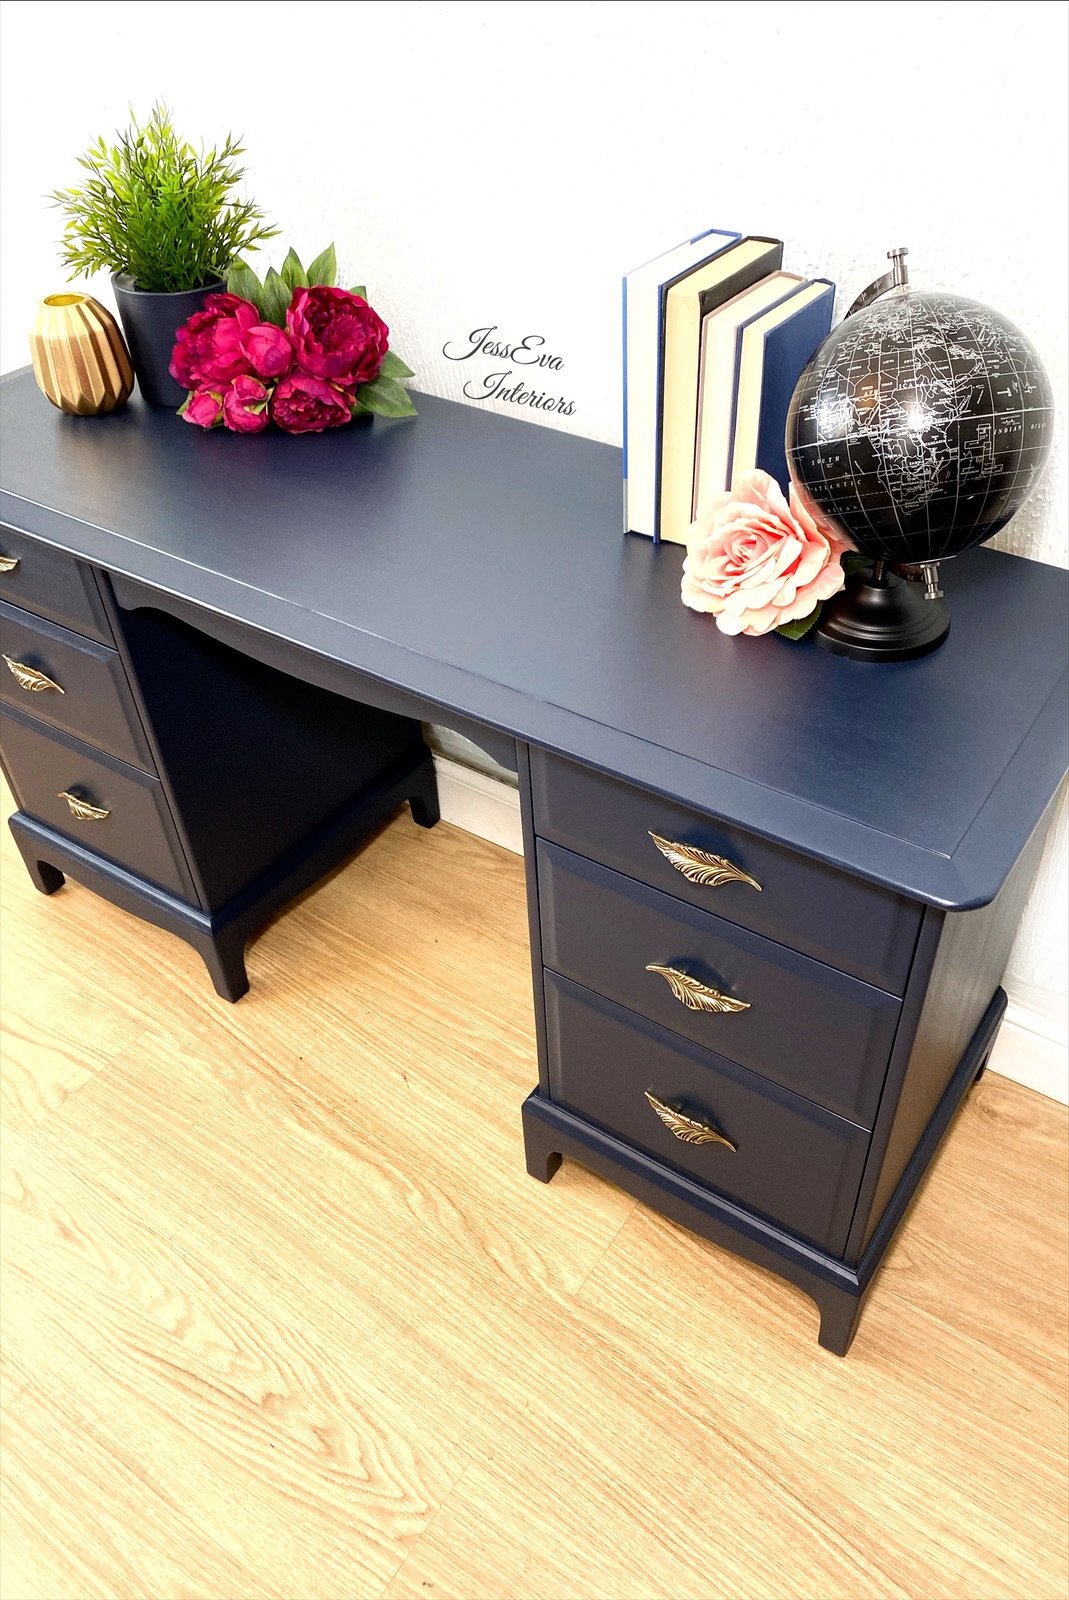 Professionally painted Navy Blue STAG MINSTREL DRESSING TABLE, WRITING DESK 